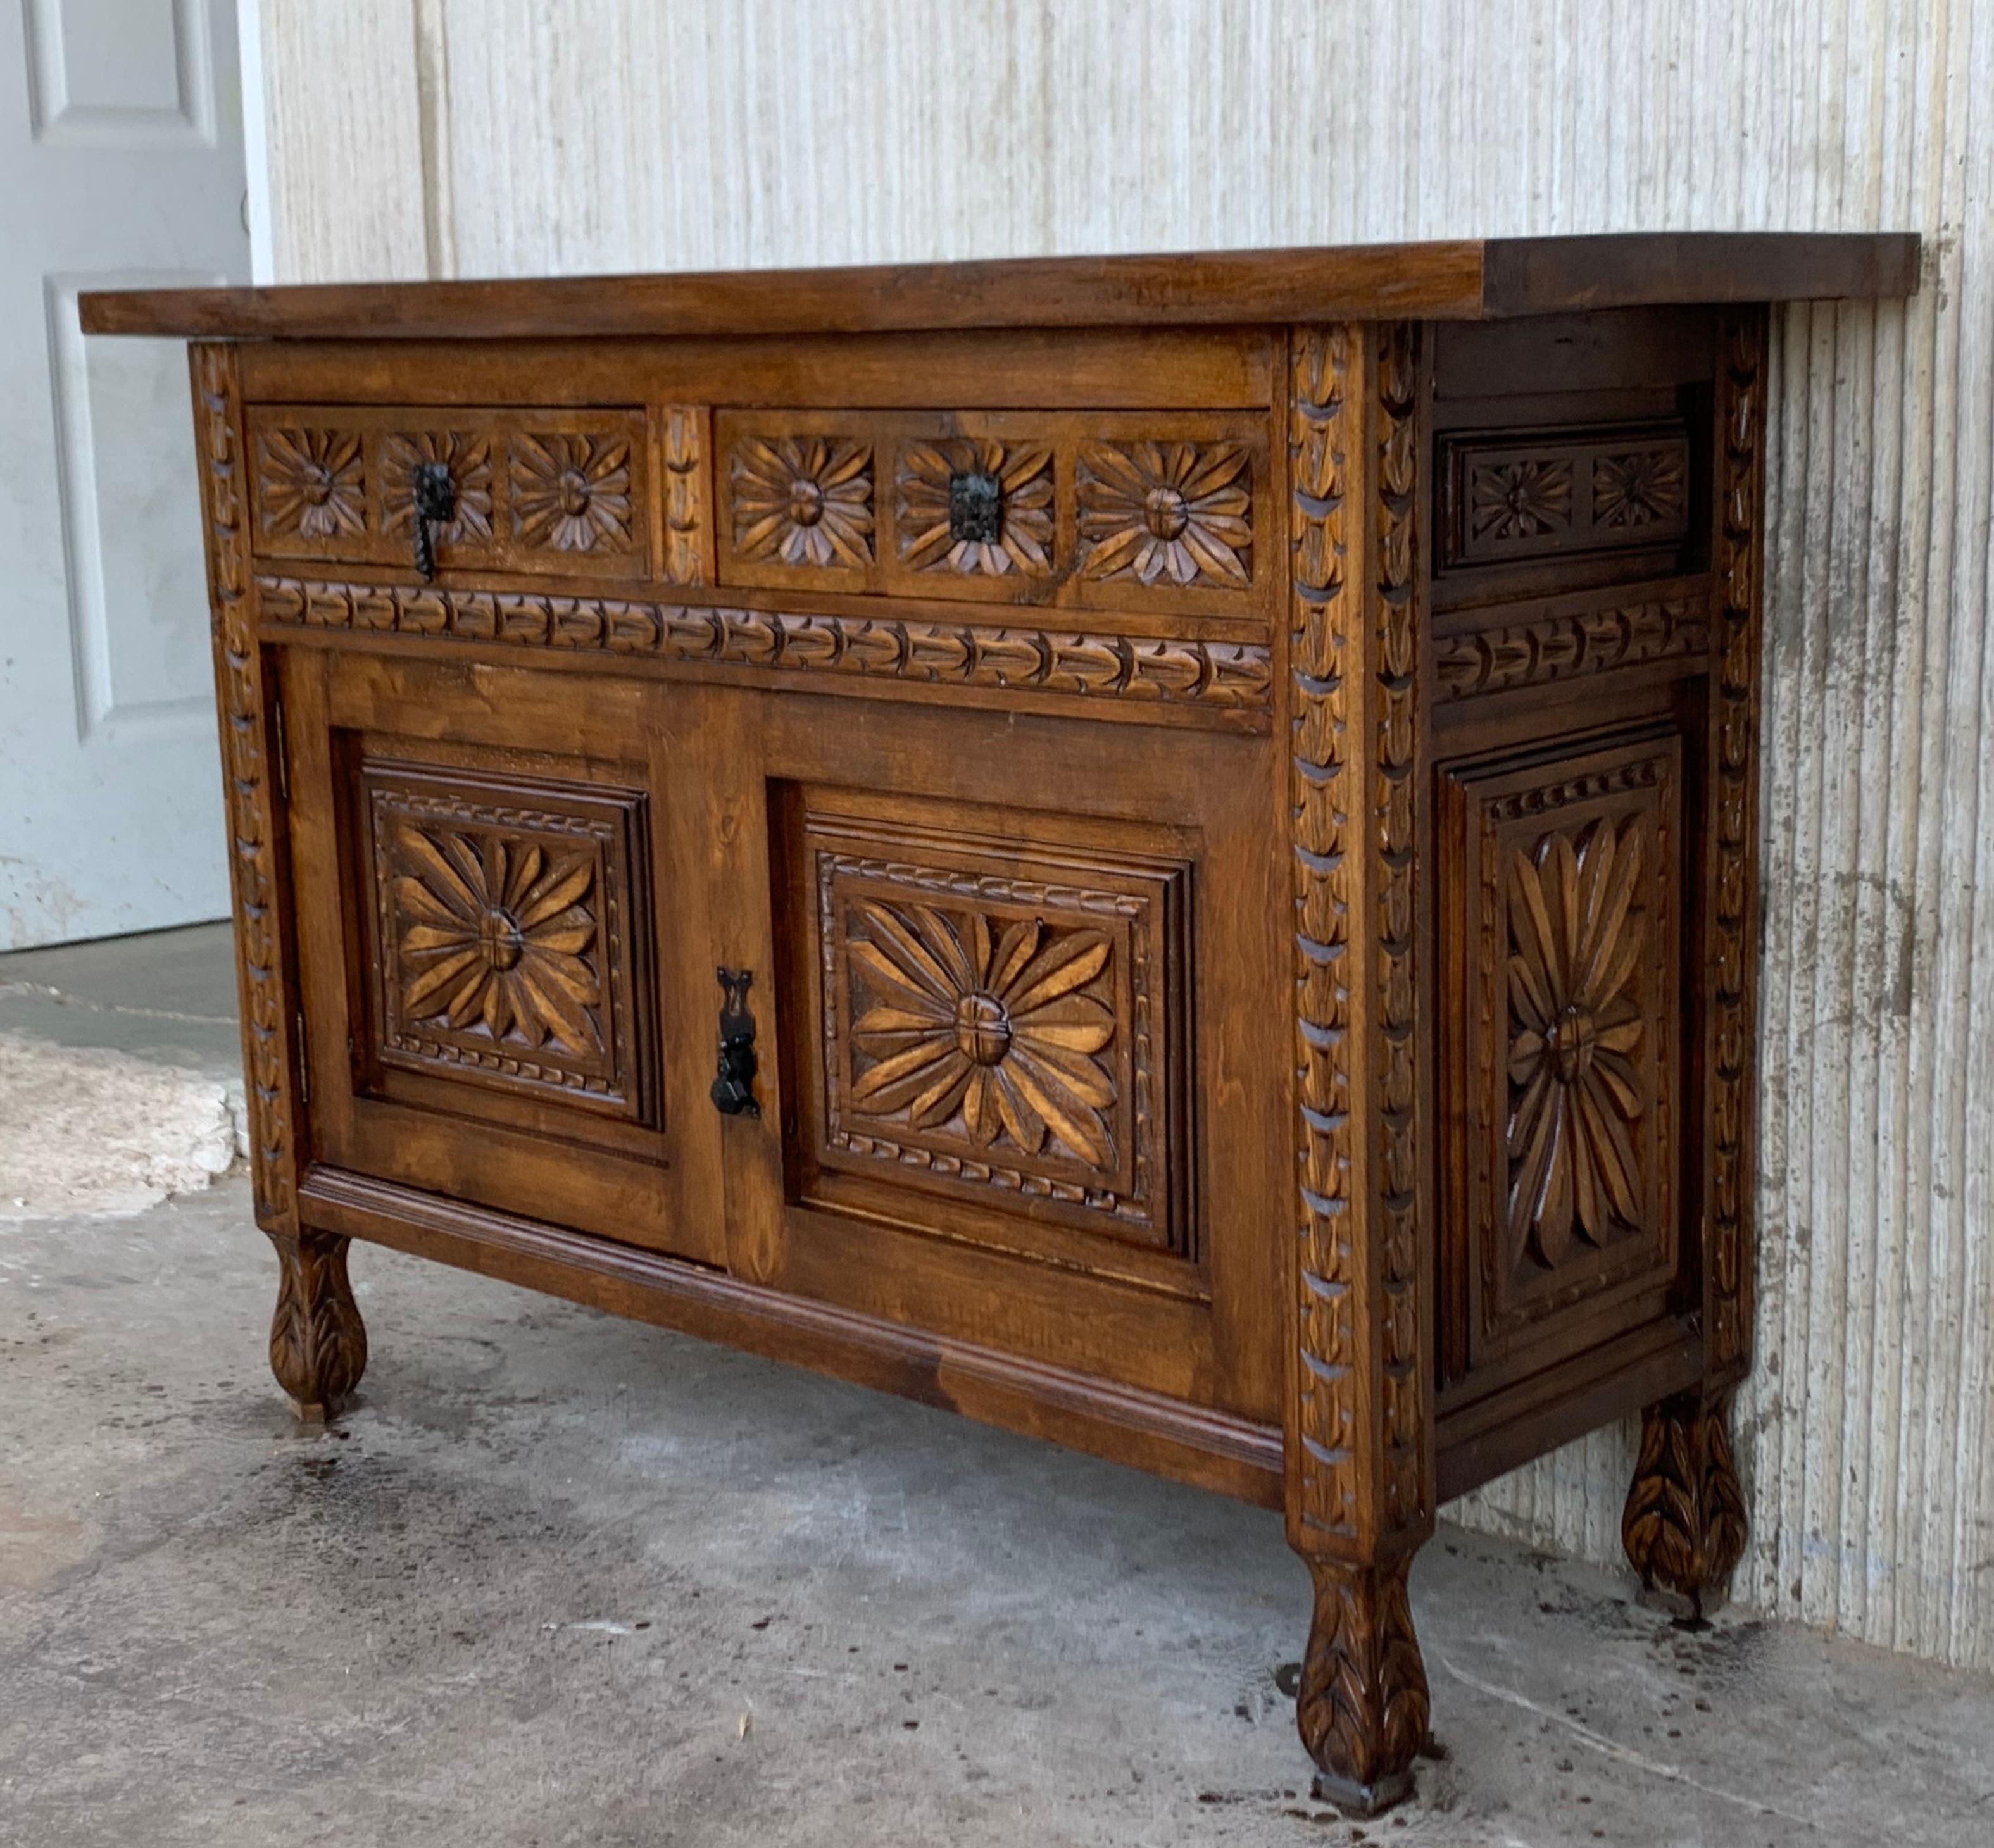 Very good quality carved Spanish cabinet cupboard, circa 1880. Beautifully carved in walnut, with good color and patina. Features four carved panels on the doors and drawers with carved decoration with acanthus leaves. The 'piece has two large